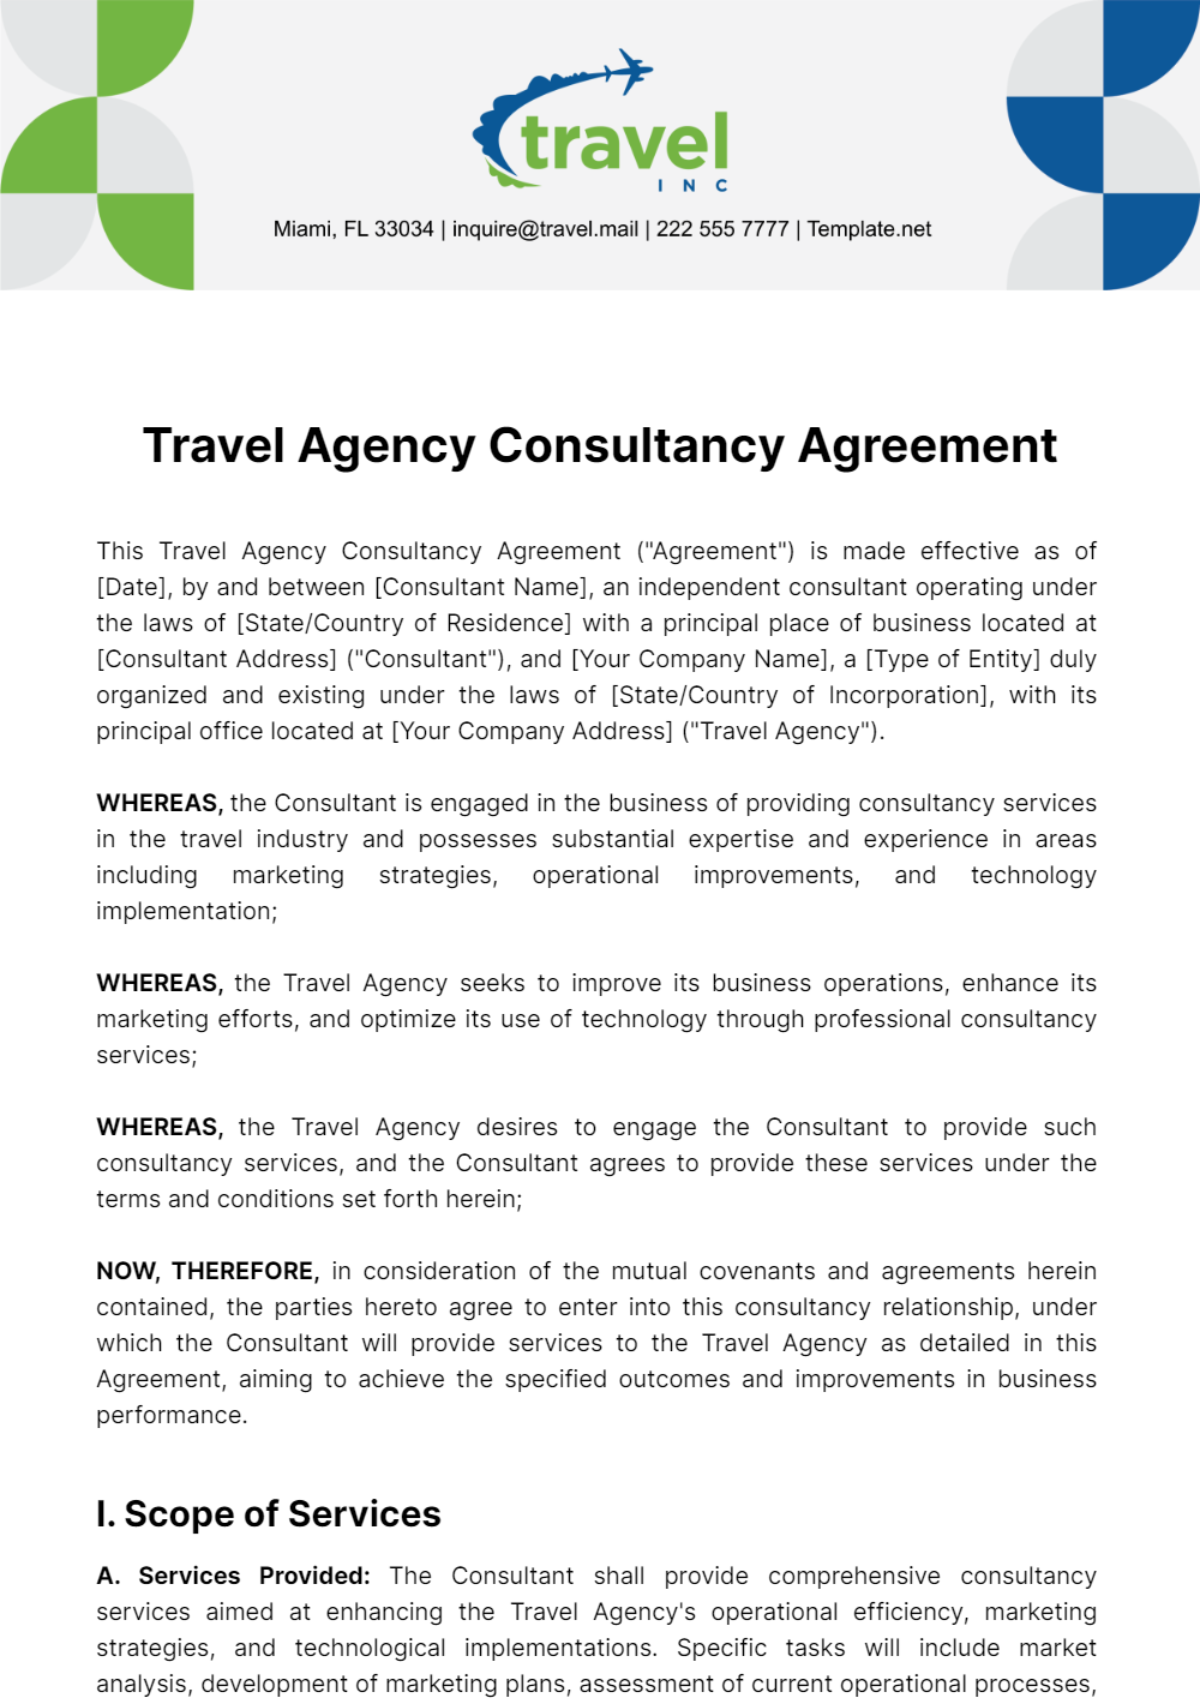 Travel Agency Consultancy Agreement Template